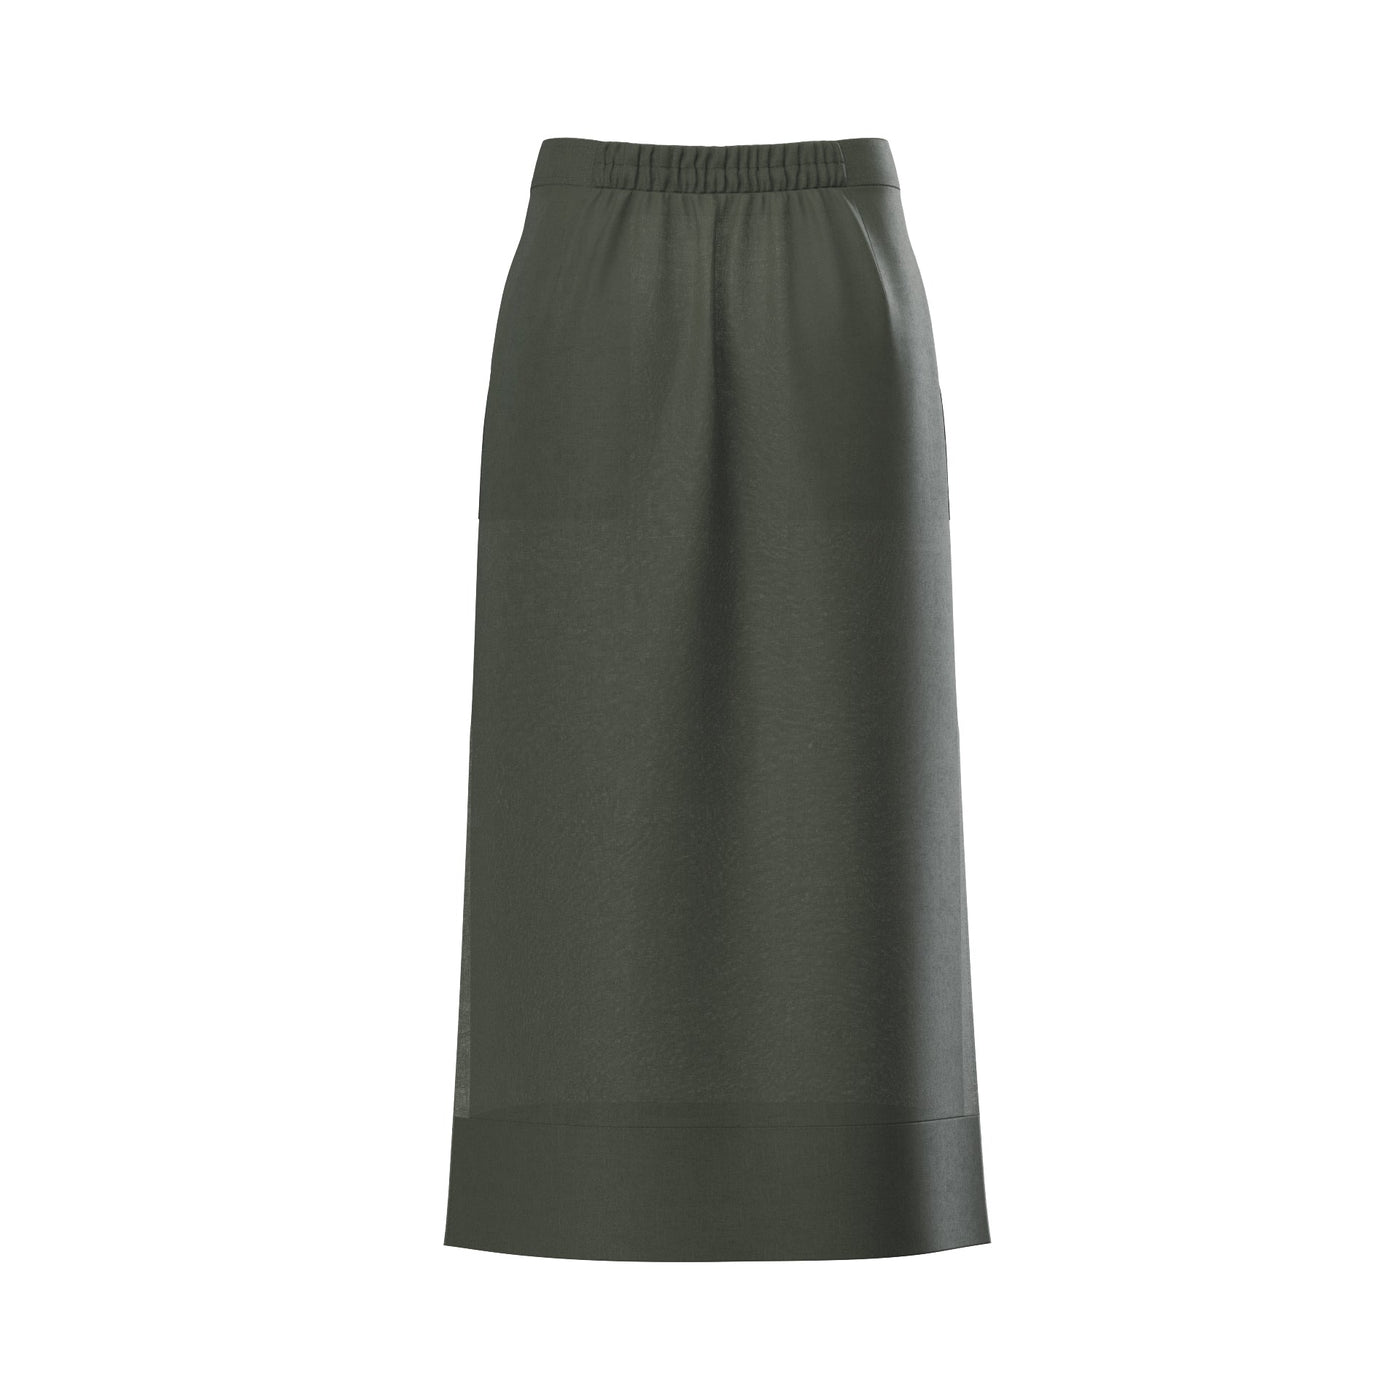 Lilly Pilly Collection Nadi skirt made from 100% Organic linen in Khaki, as 3D model showing back view